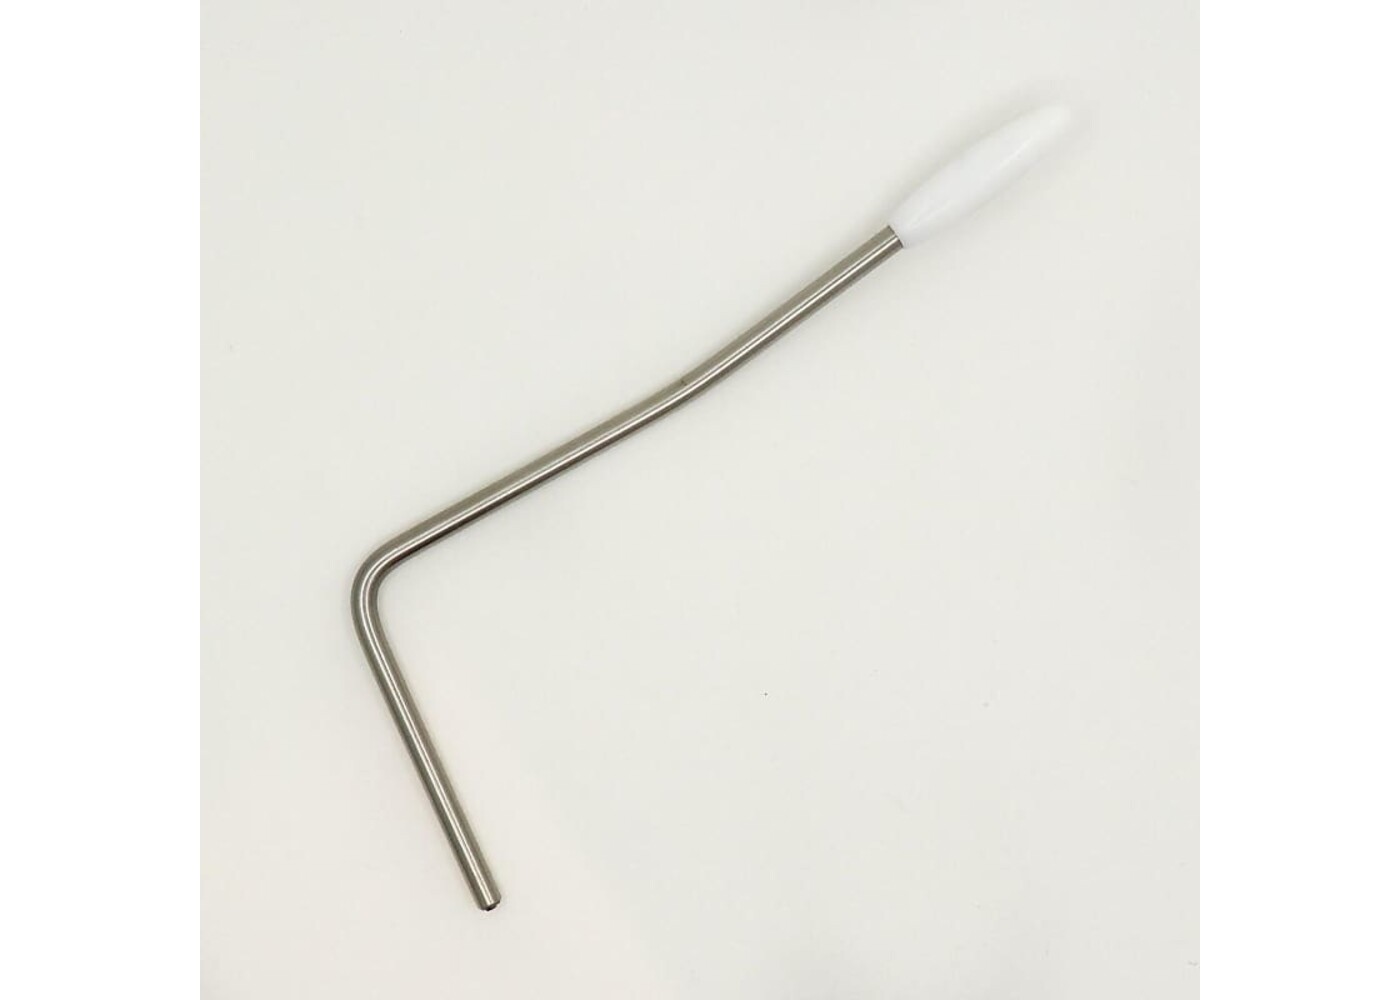 MannMade USA MannMade USA "Hi-Rise" Tremolo Arm - Left hand  - Stainless Steel